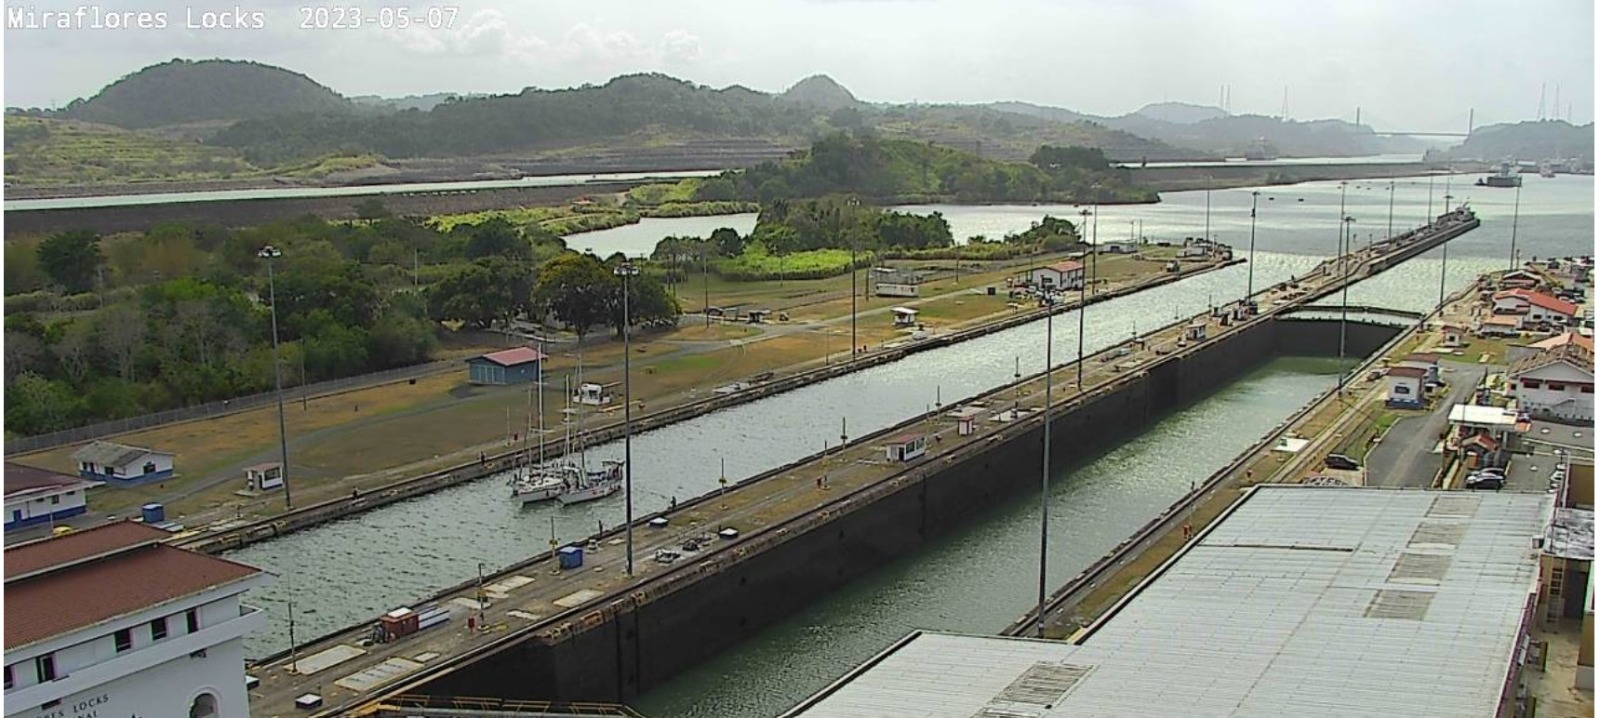 The Panama canal images/2023/can/mia5.jpg